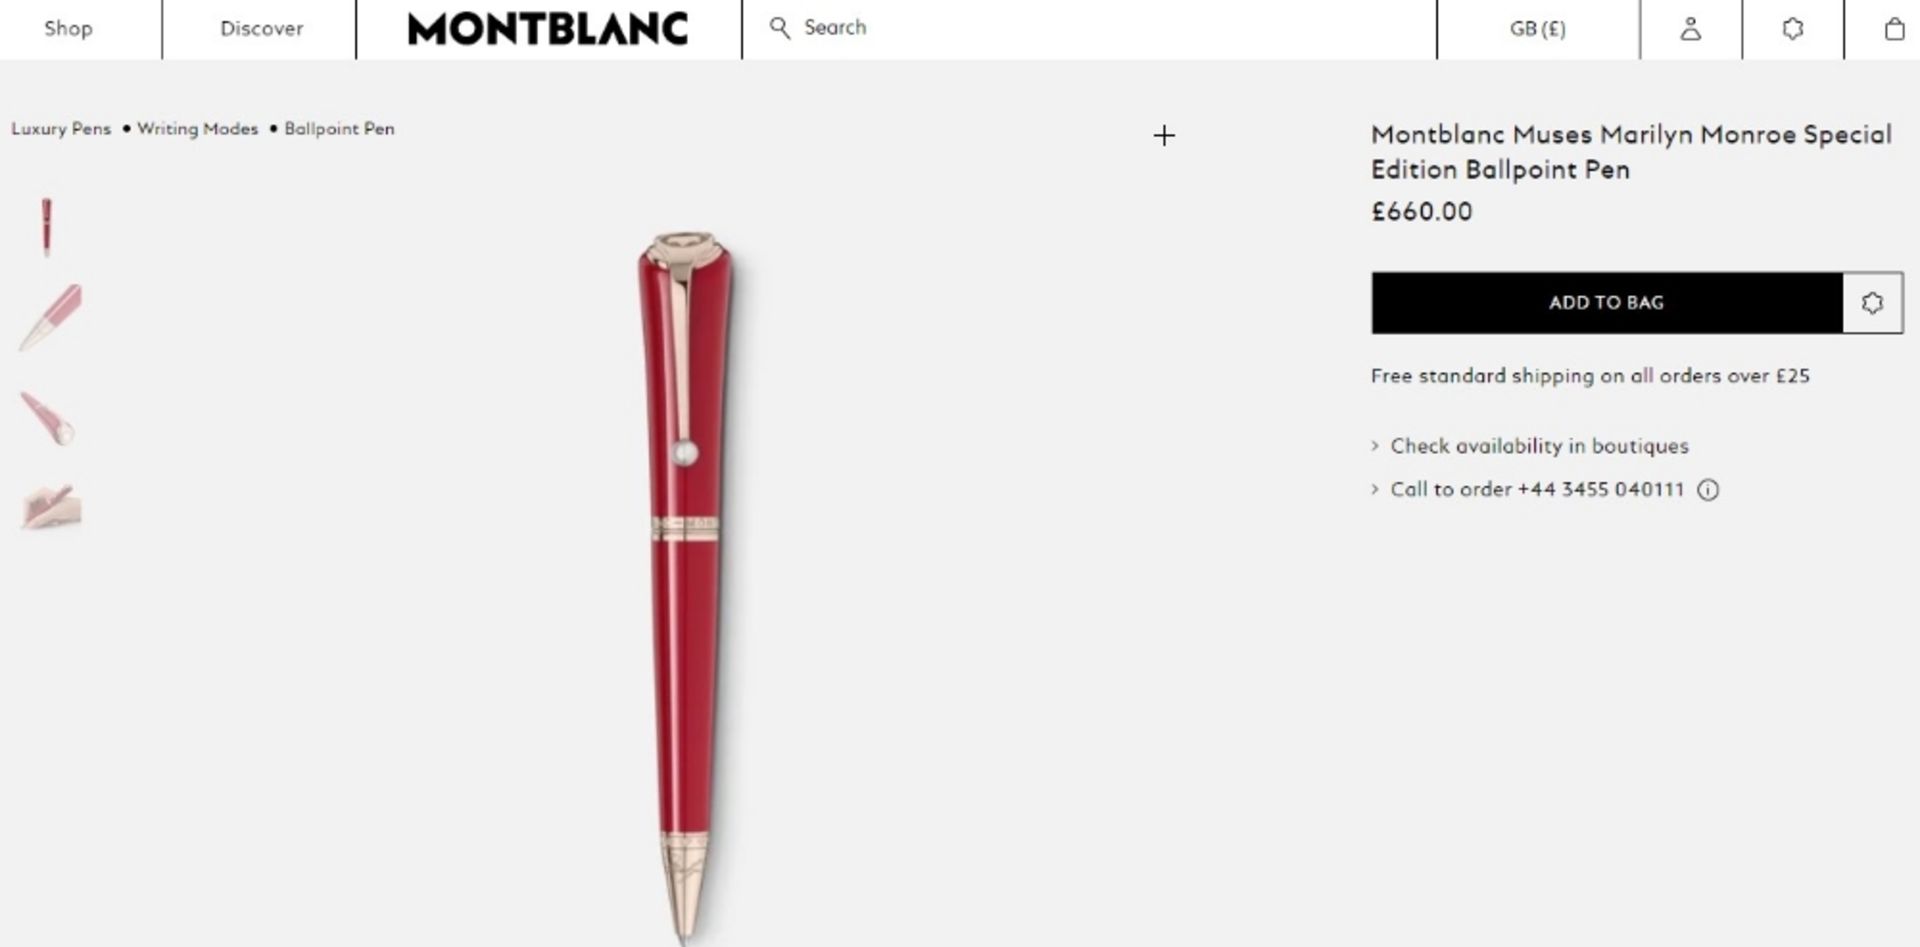 Montblanc Muses Marilyn Monroe Special Edition Ballpoint Pen - Image 6 of 9